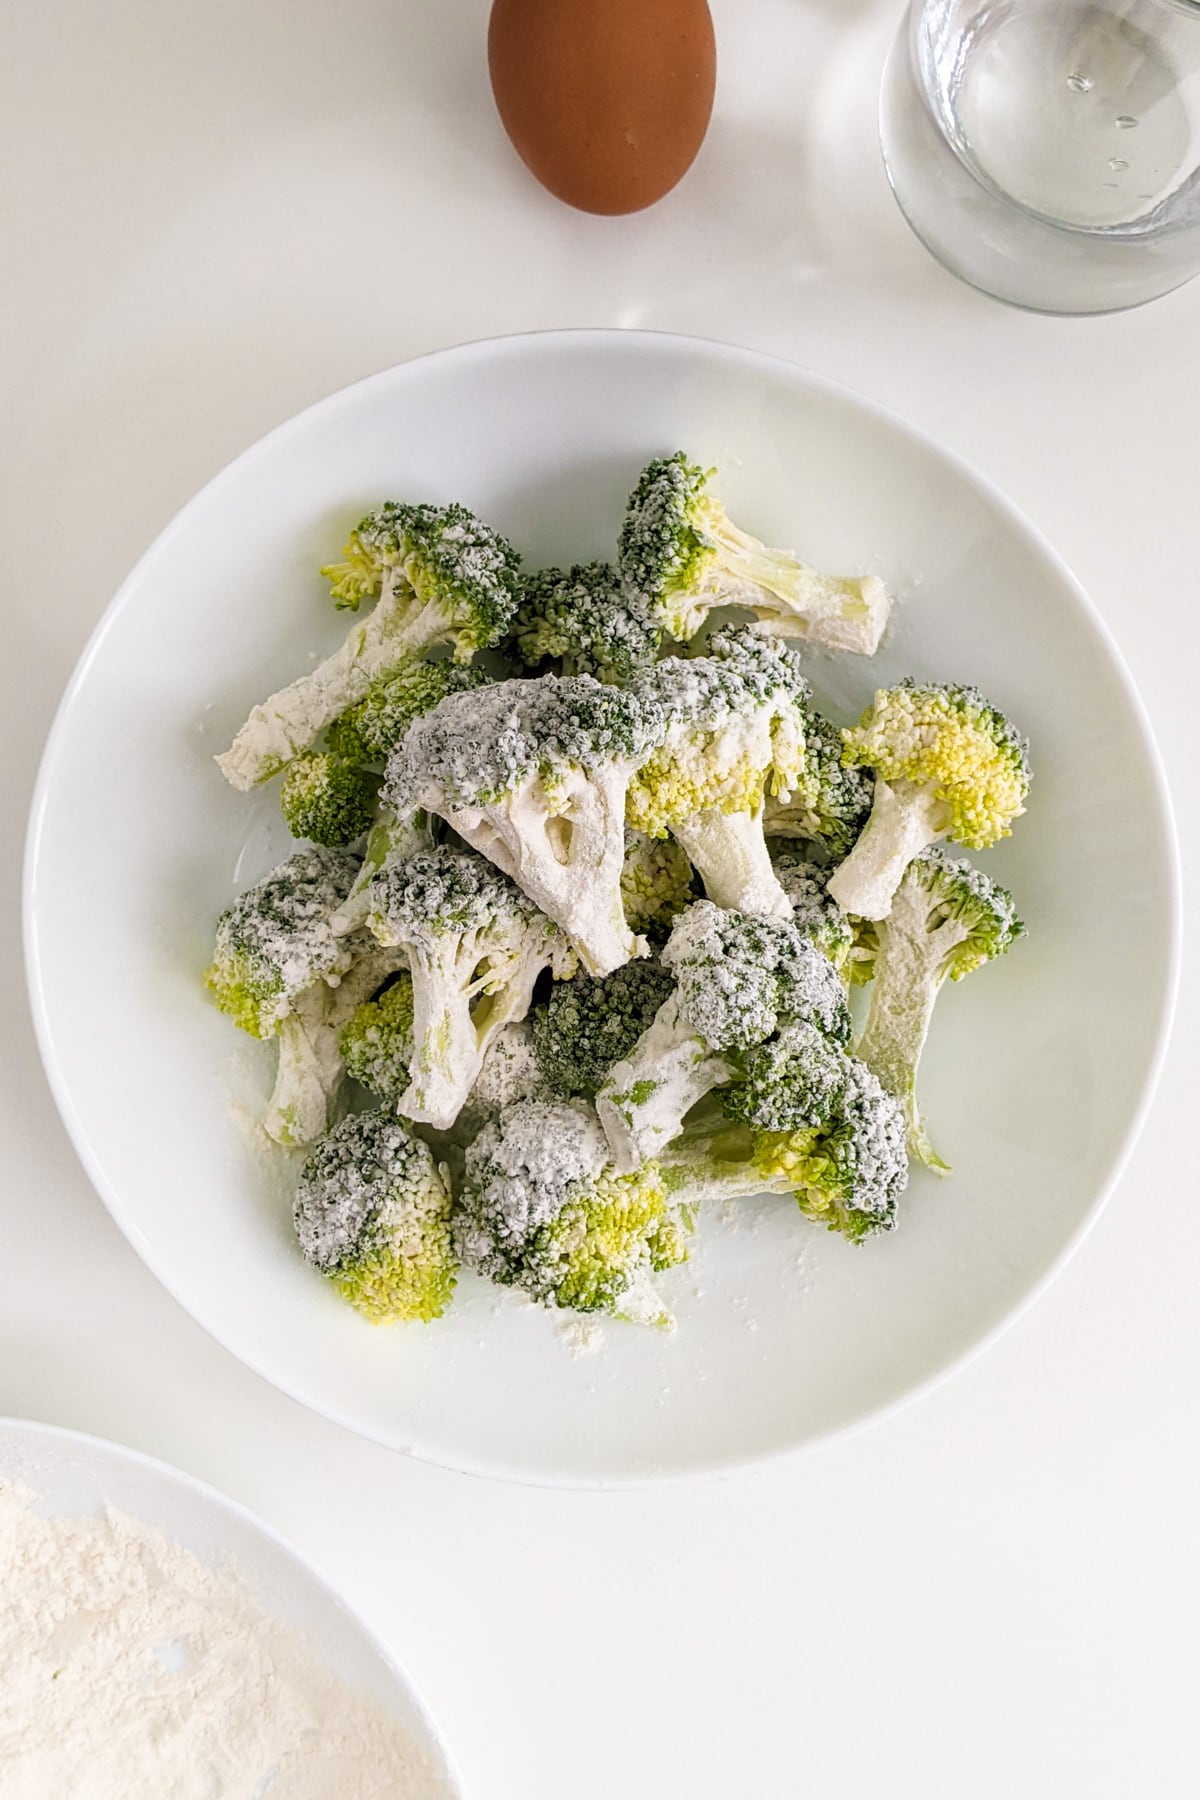 Broccoli florets coated in flour.